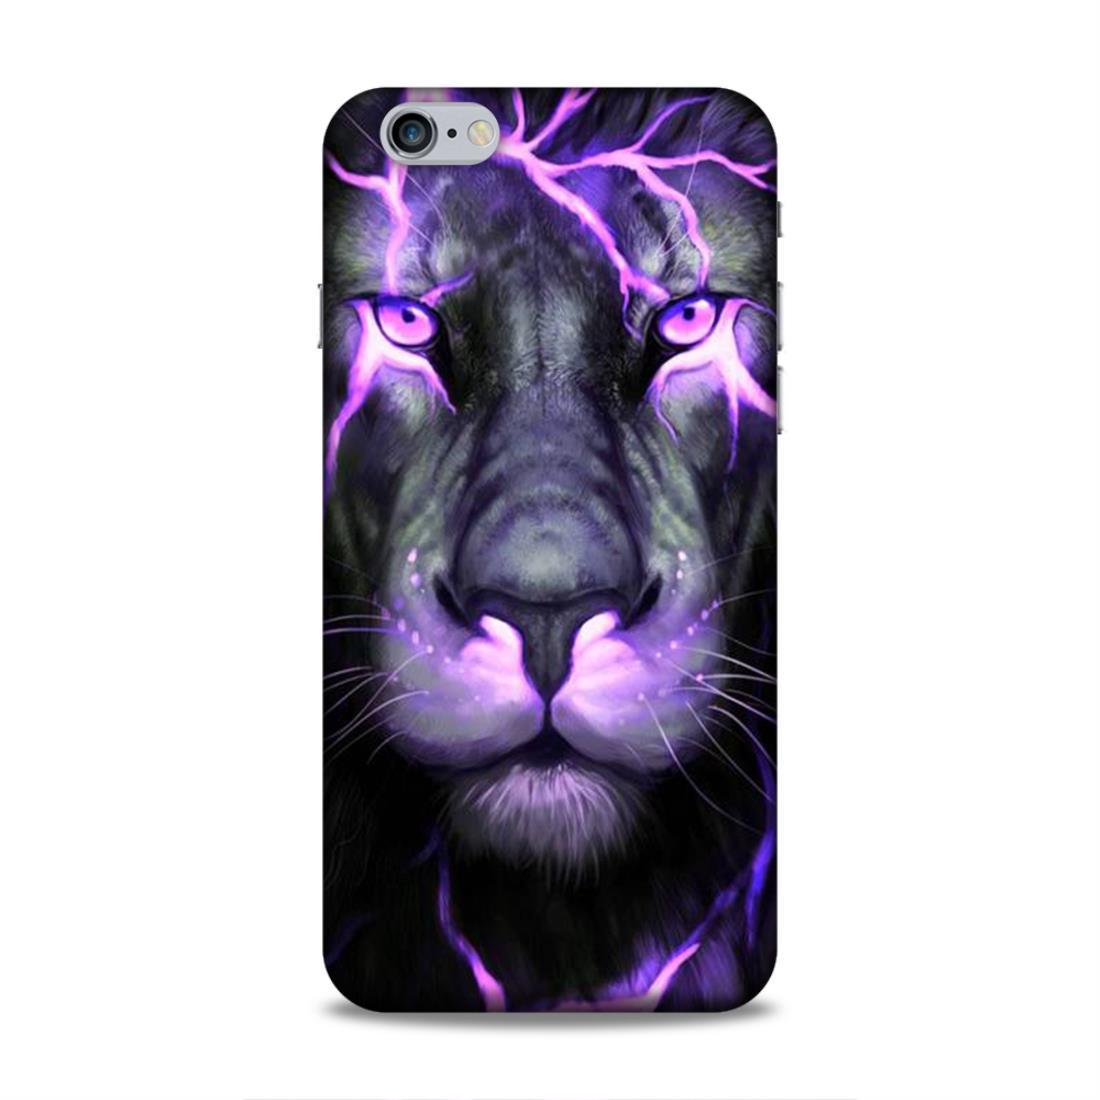 Lion Pattern iPhone 6 Plus Phone Cover Case